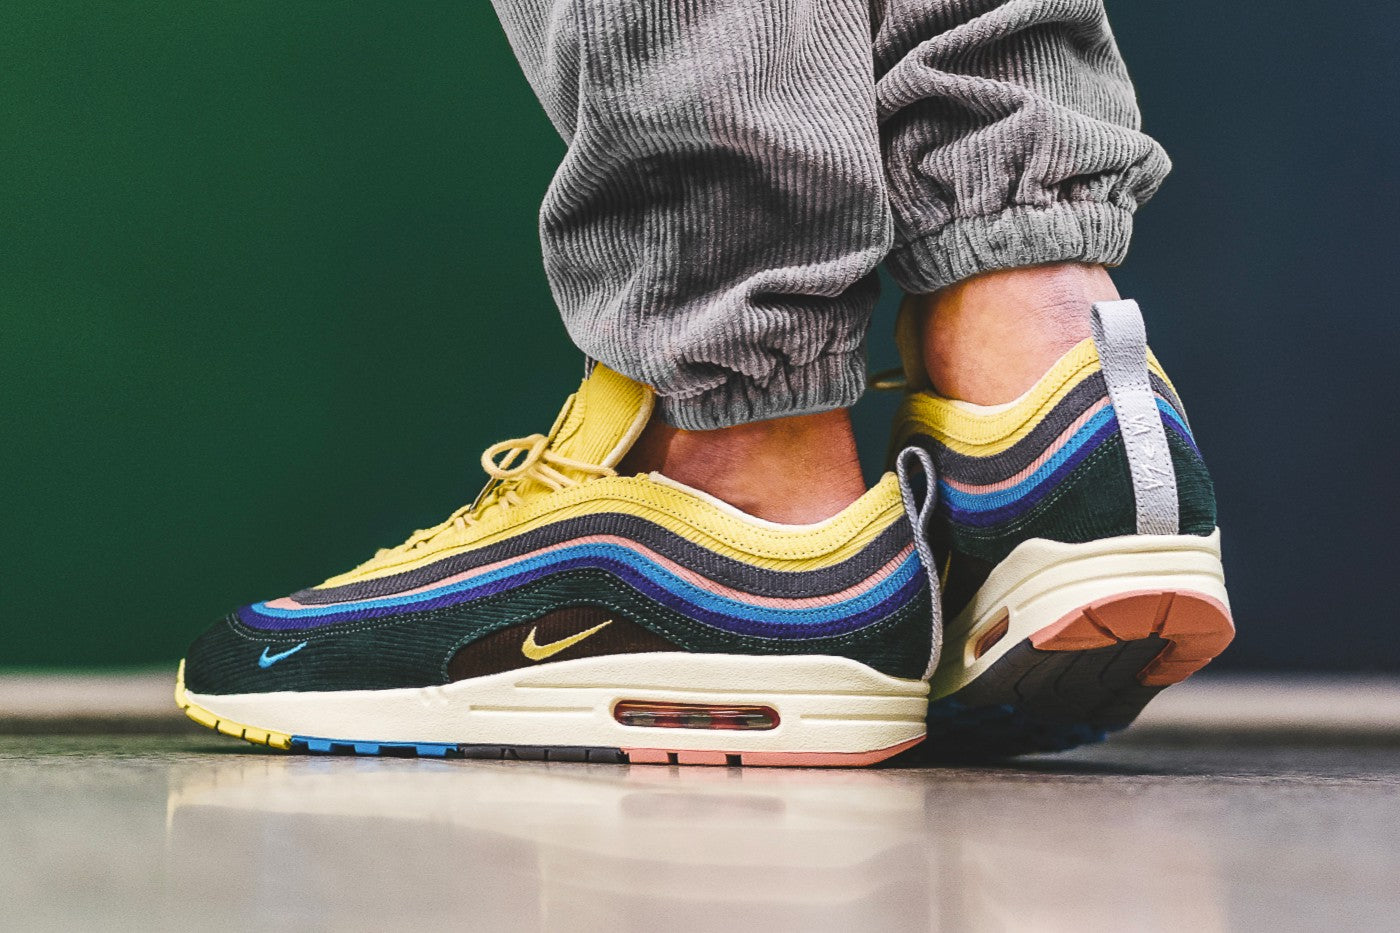 100 - Air Max Day 2023: The Hottest Nike Fleece Air Max Sneakers